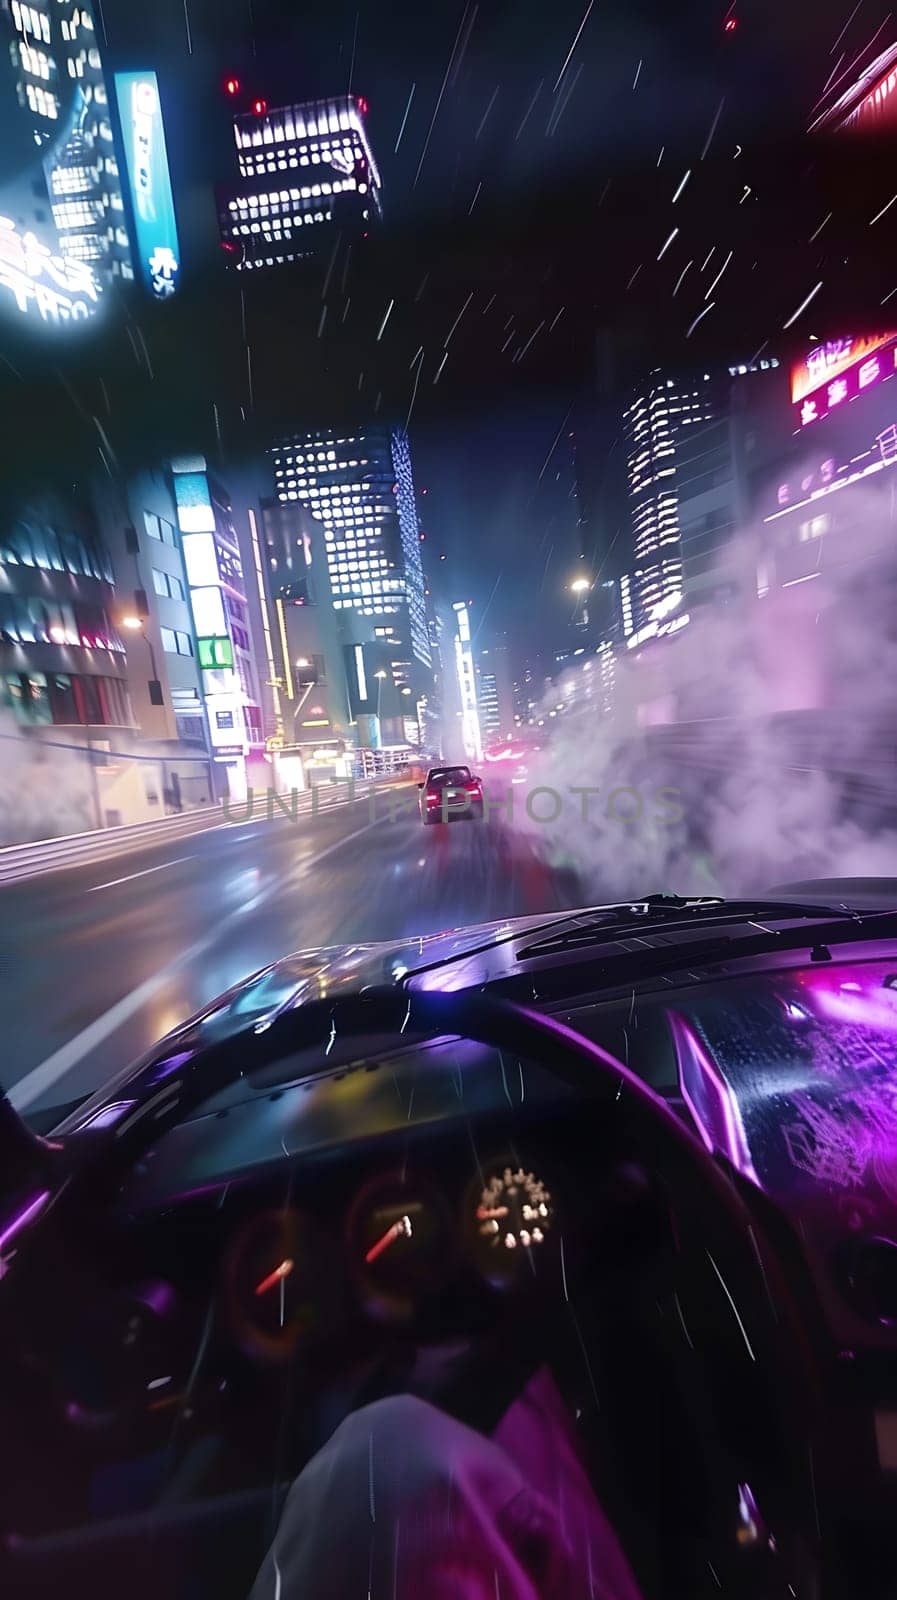 A purple car with stylish automotive exterior and modern technology is driving down a city street at night, illuminating the buildings with its bold headlights